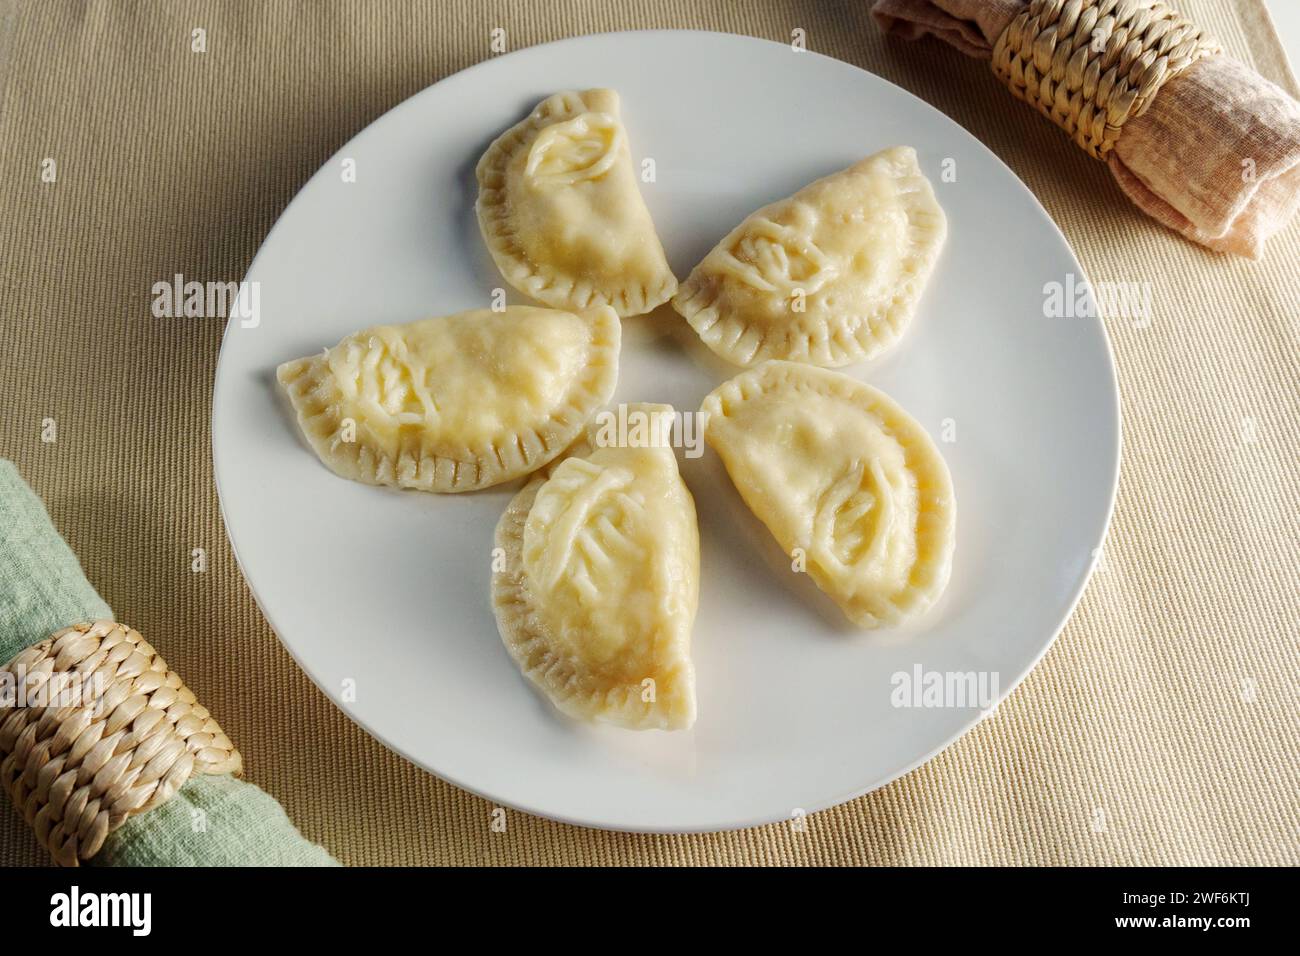 Delectable Crescent Dumplings on a Plate: A Culinary Snapshot Stock Photo